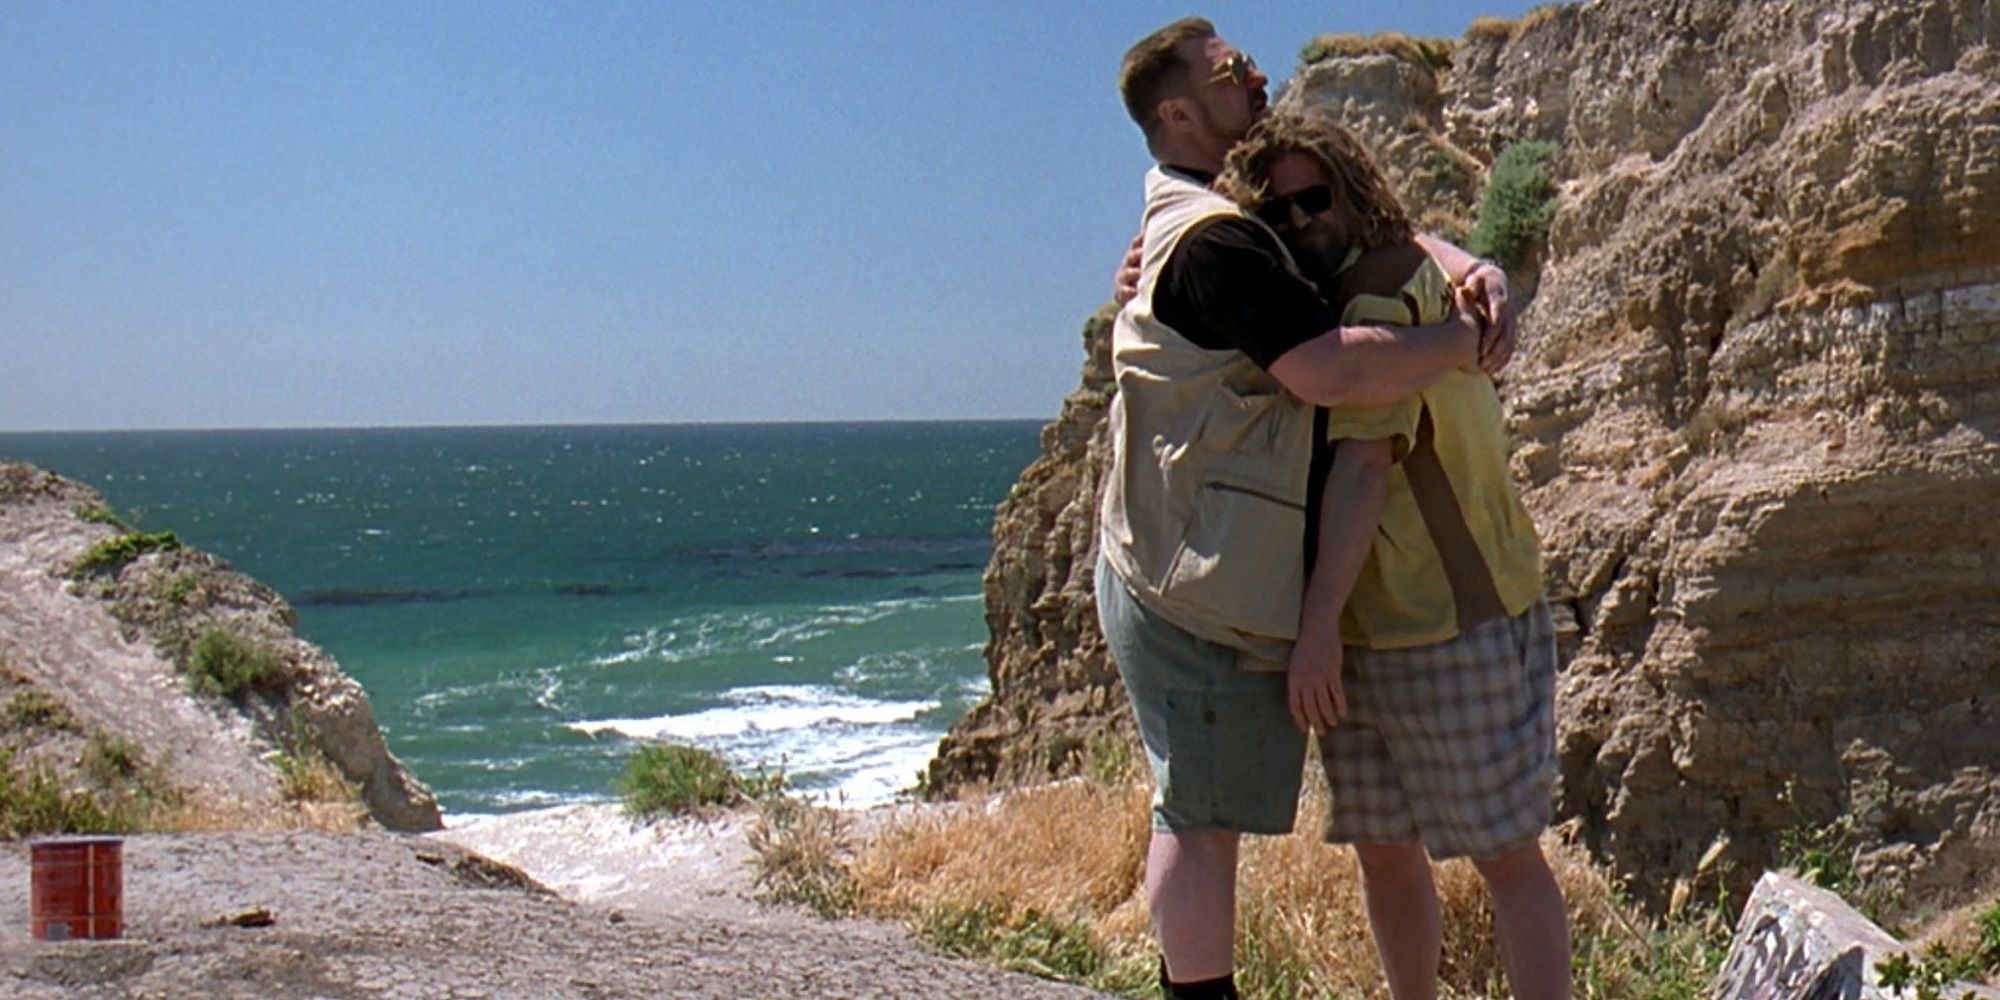 Walter hugs the Dude at the beach in The Big Lebowski